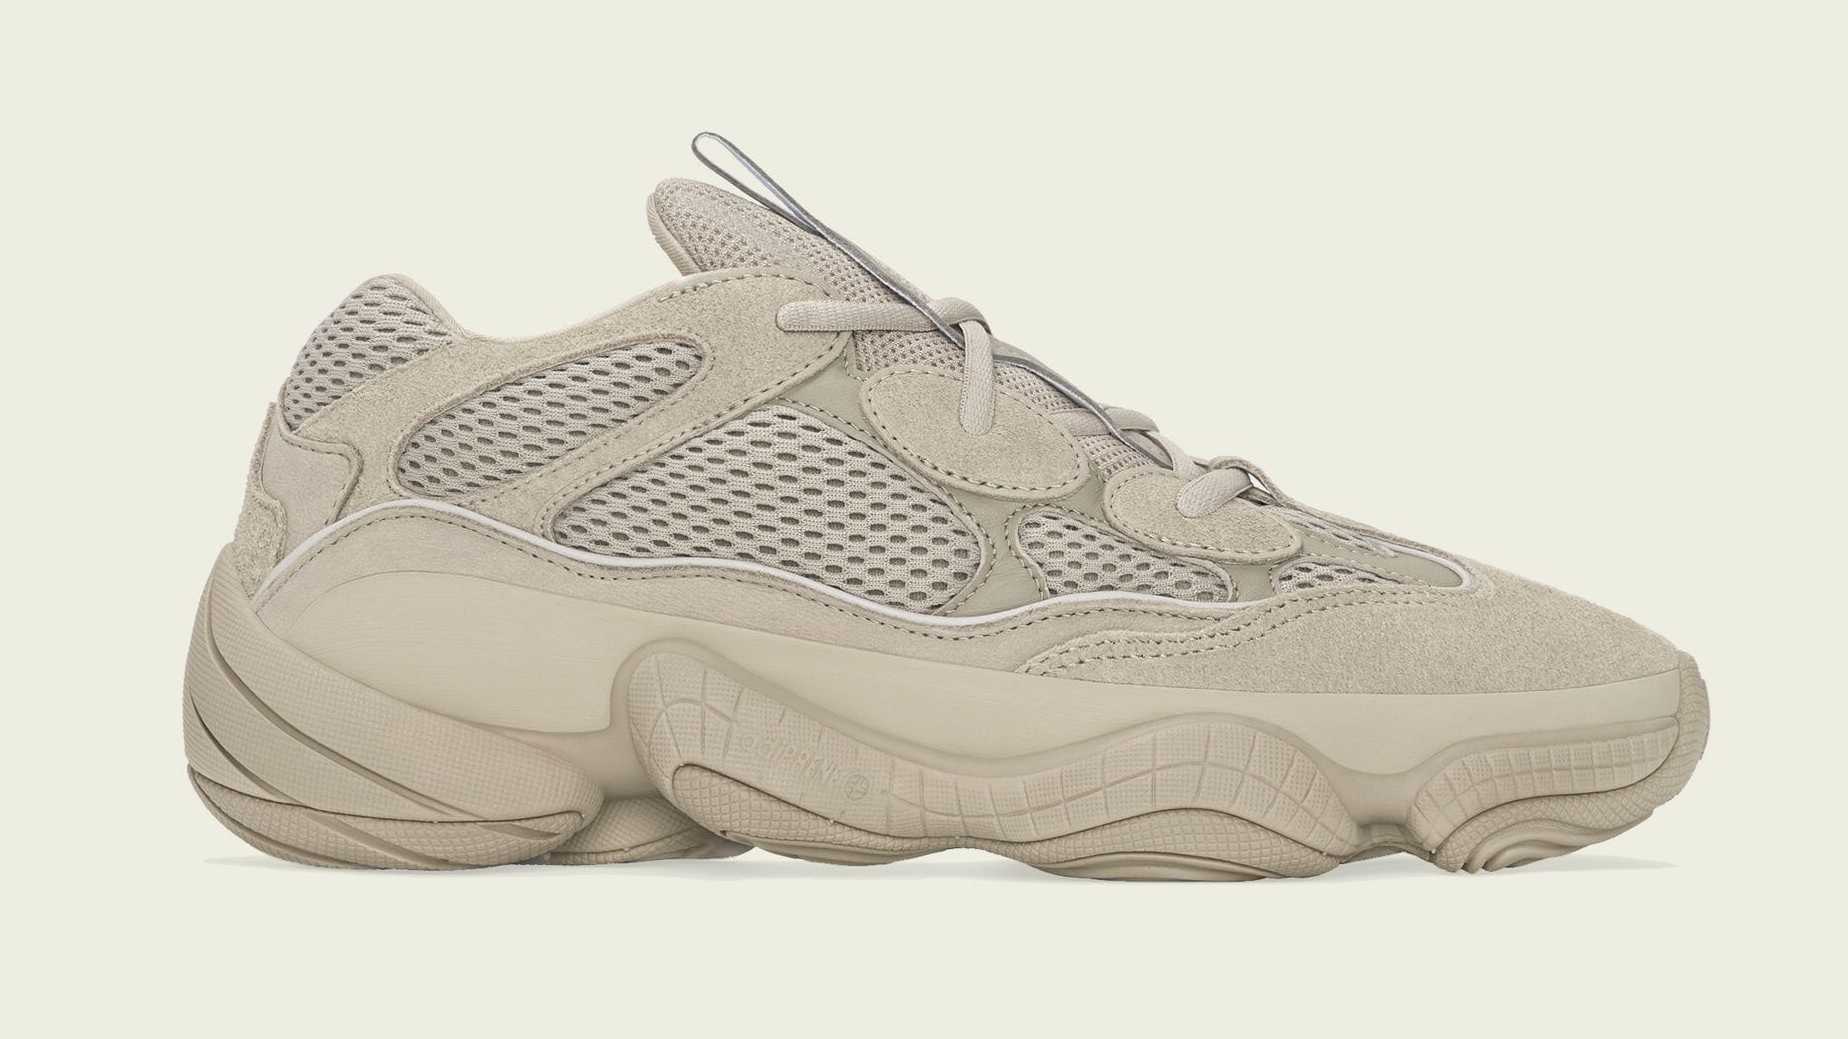 Adidas Yeezy 500 'Taupe Light' Lateral